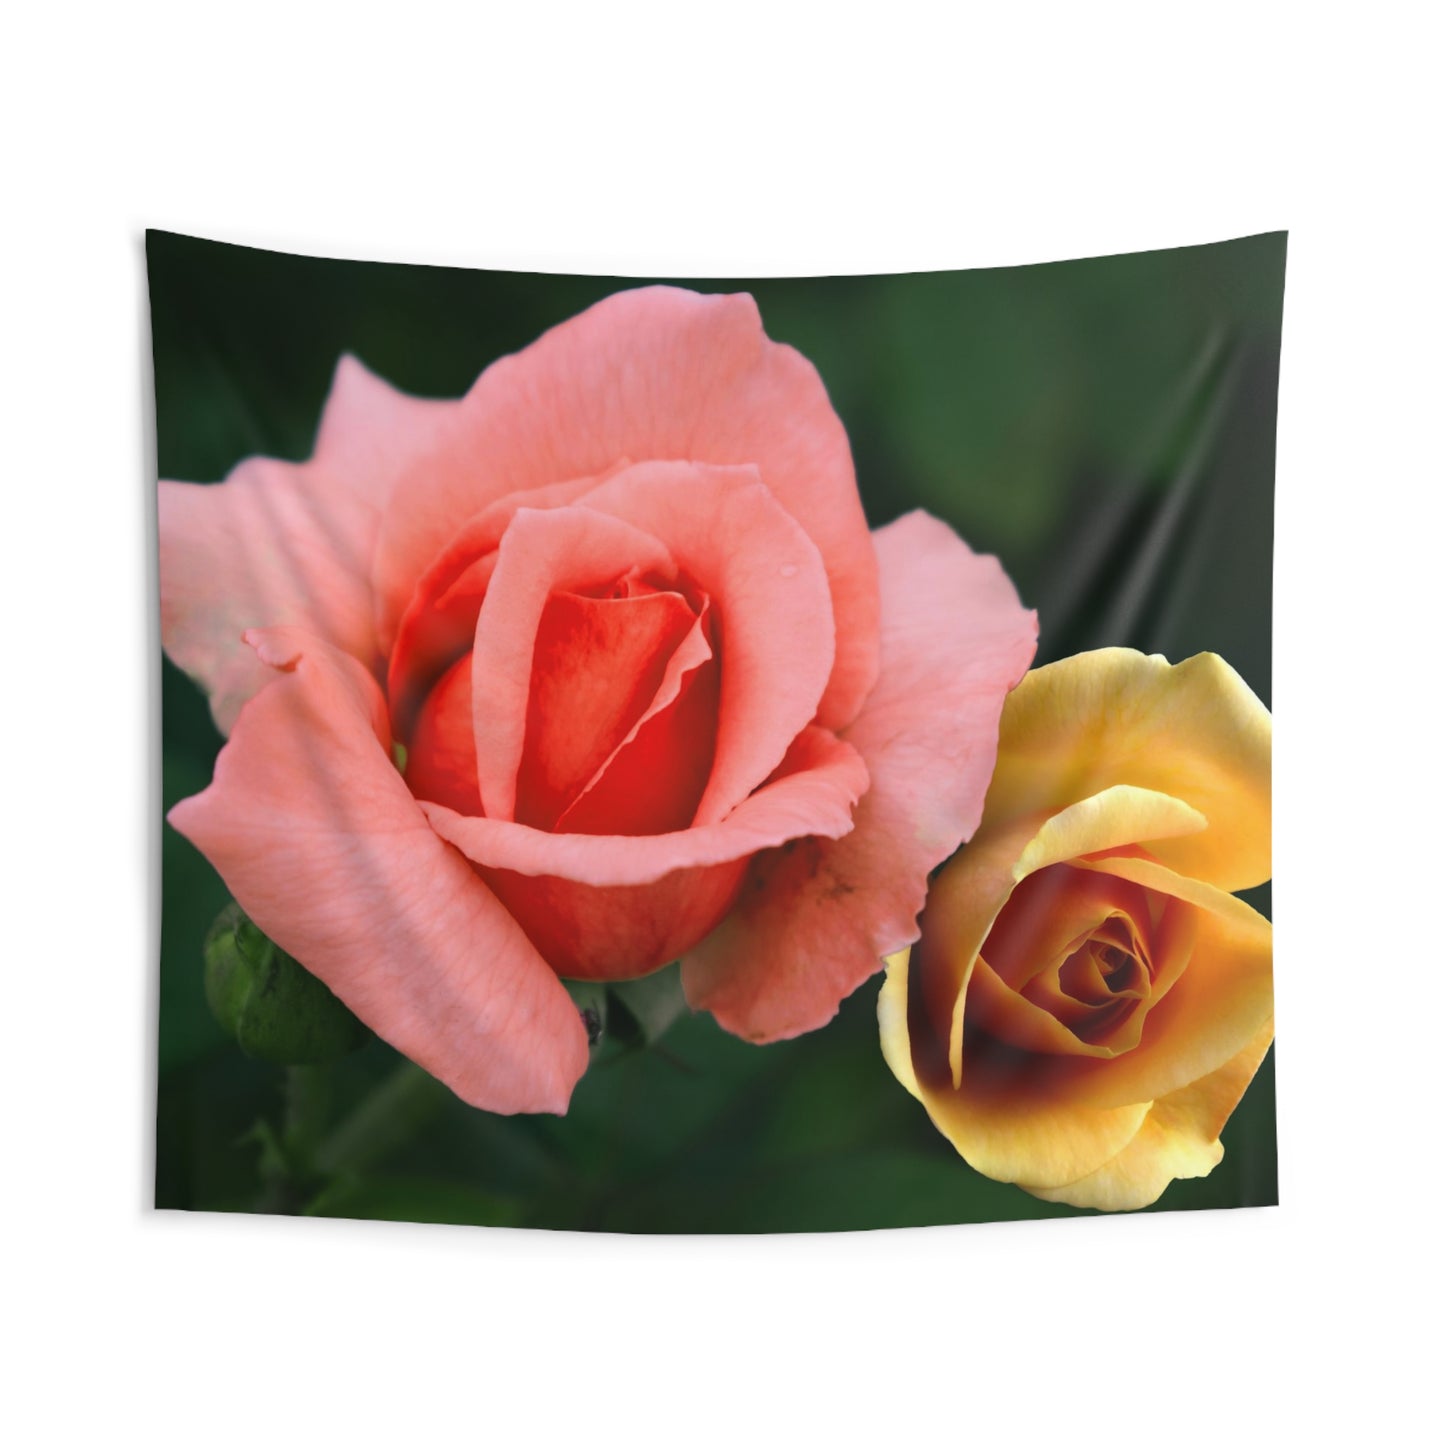 Pink And Yellow Rose Tapestry